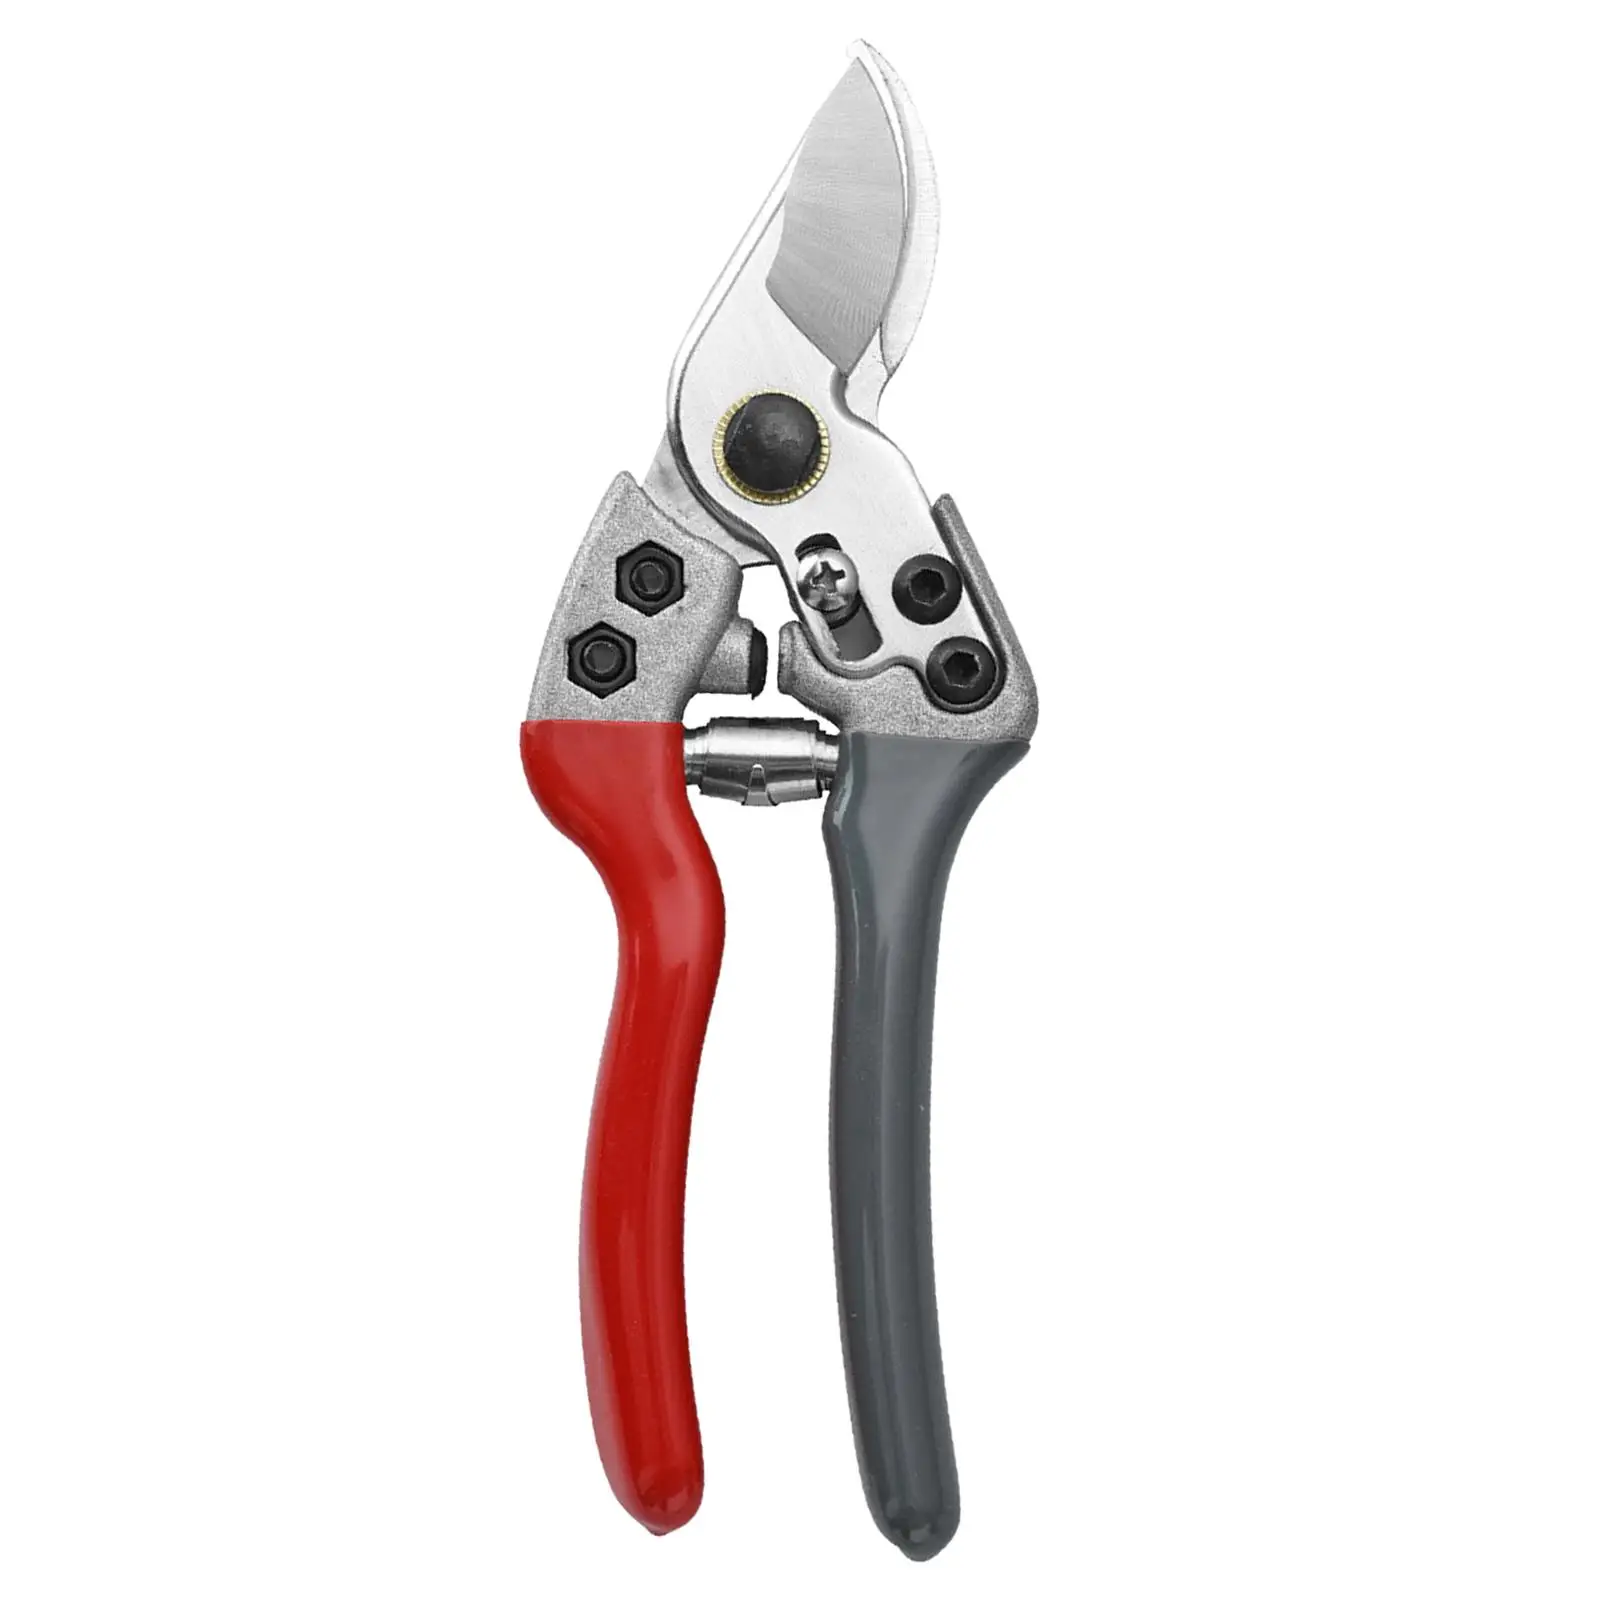 Pruning shear Rose Flower Hedge Cutter Gardening Tools Hand Pruners Garden Clippers for Flowers Orchard Bonsai Branches Bushes